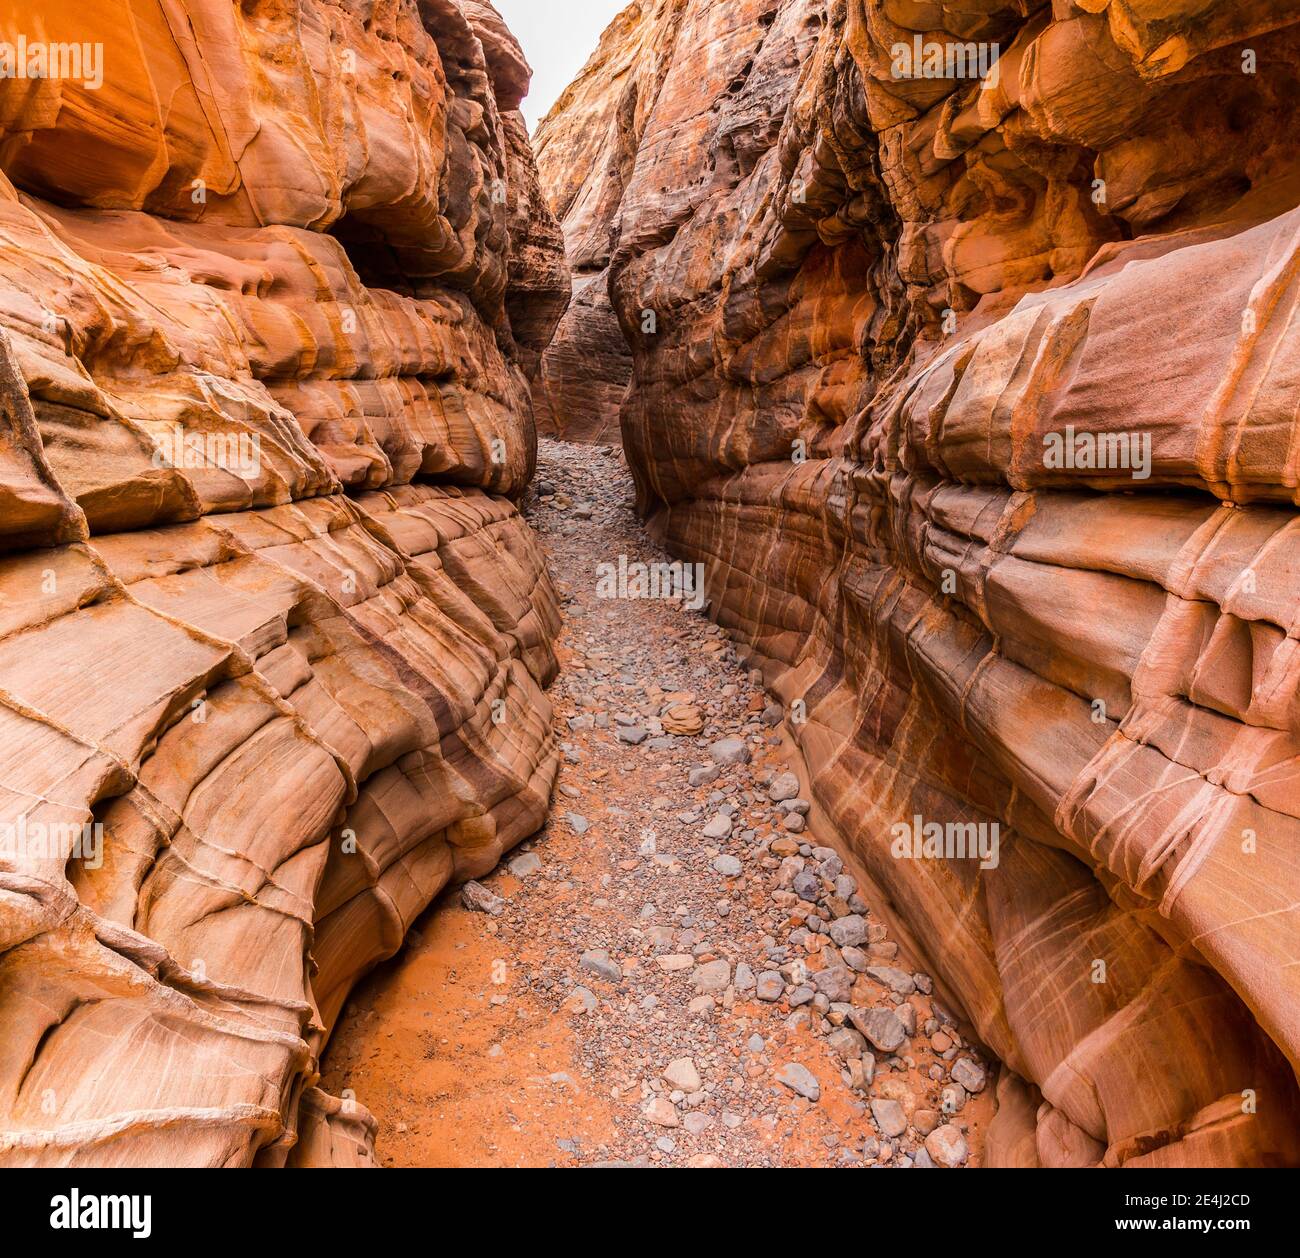 Pastel Walled Slot Canyon In Kaolin Wash, Valley of Fire State Park, Nevada, USA Stock Photo